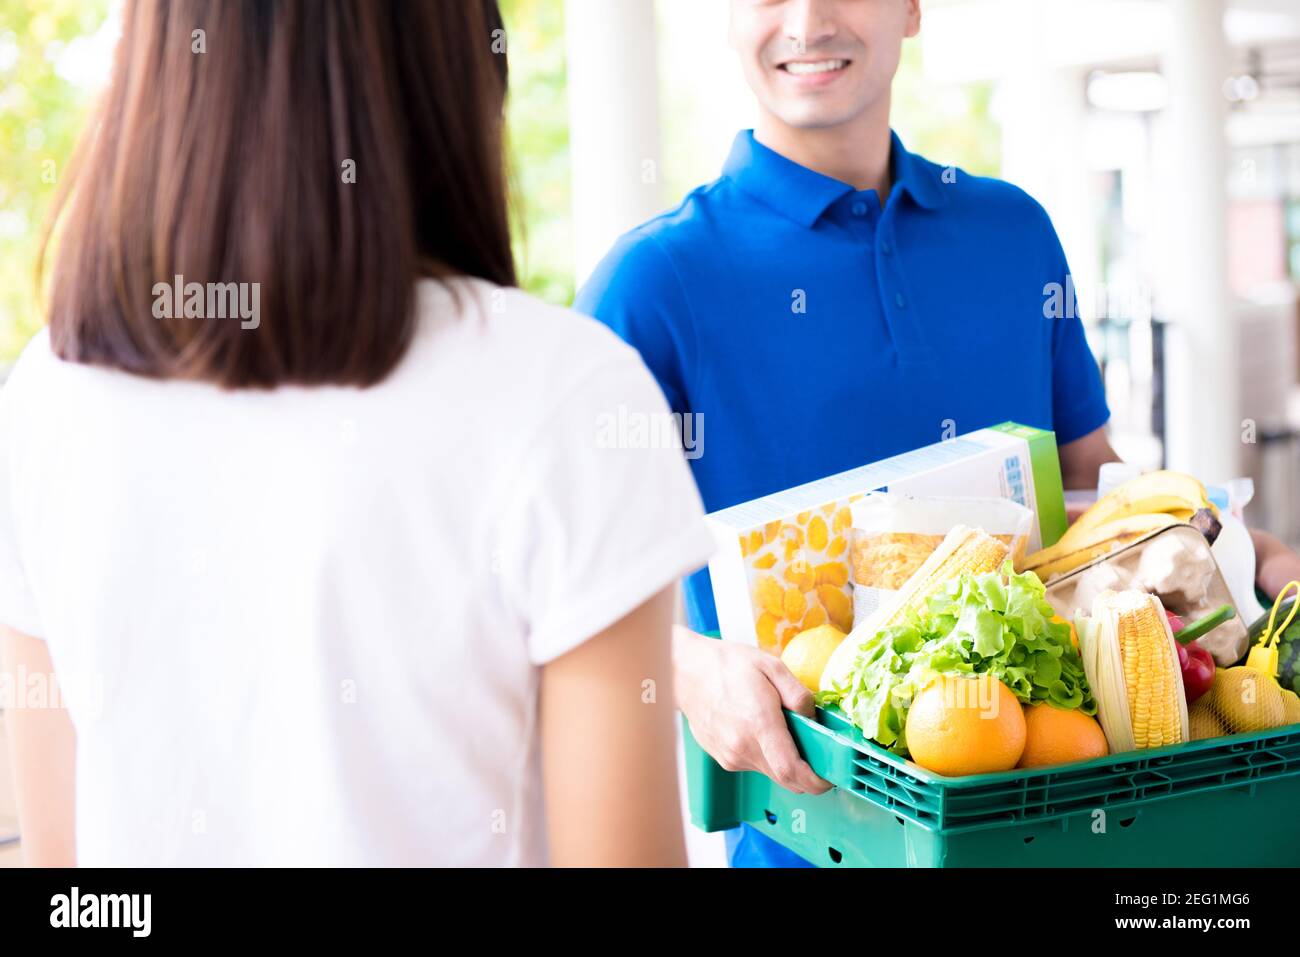 Delivery man delivering food to a woman - online grocery shopping service concept Stock Photo